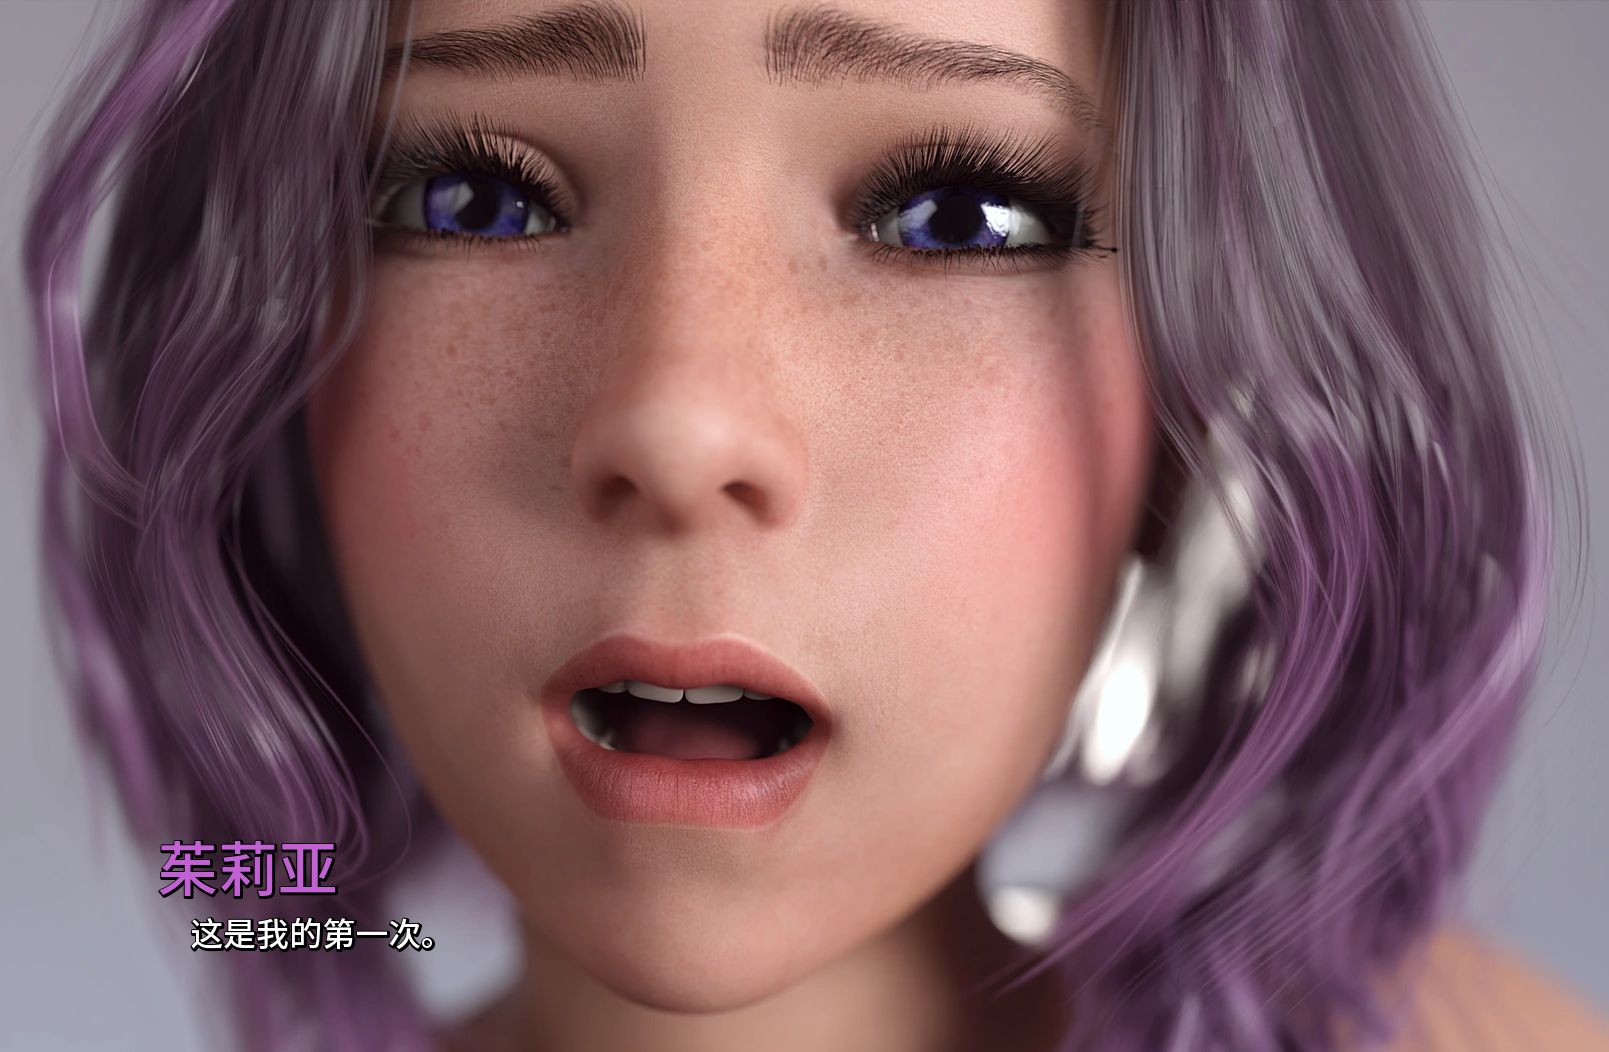 Eyeball Mouth Hair CGi Wavy Hair Open Mouth Eyes Looking At Viewer Chinese 1609x1052